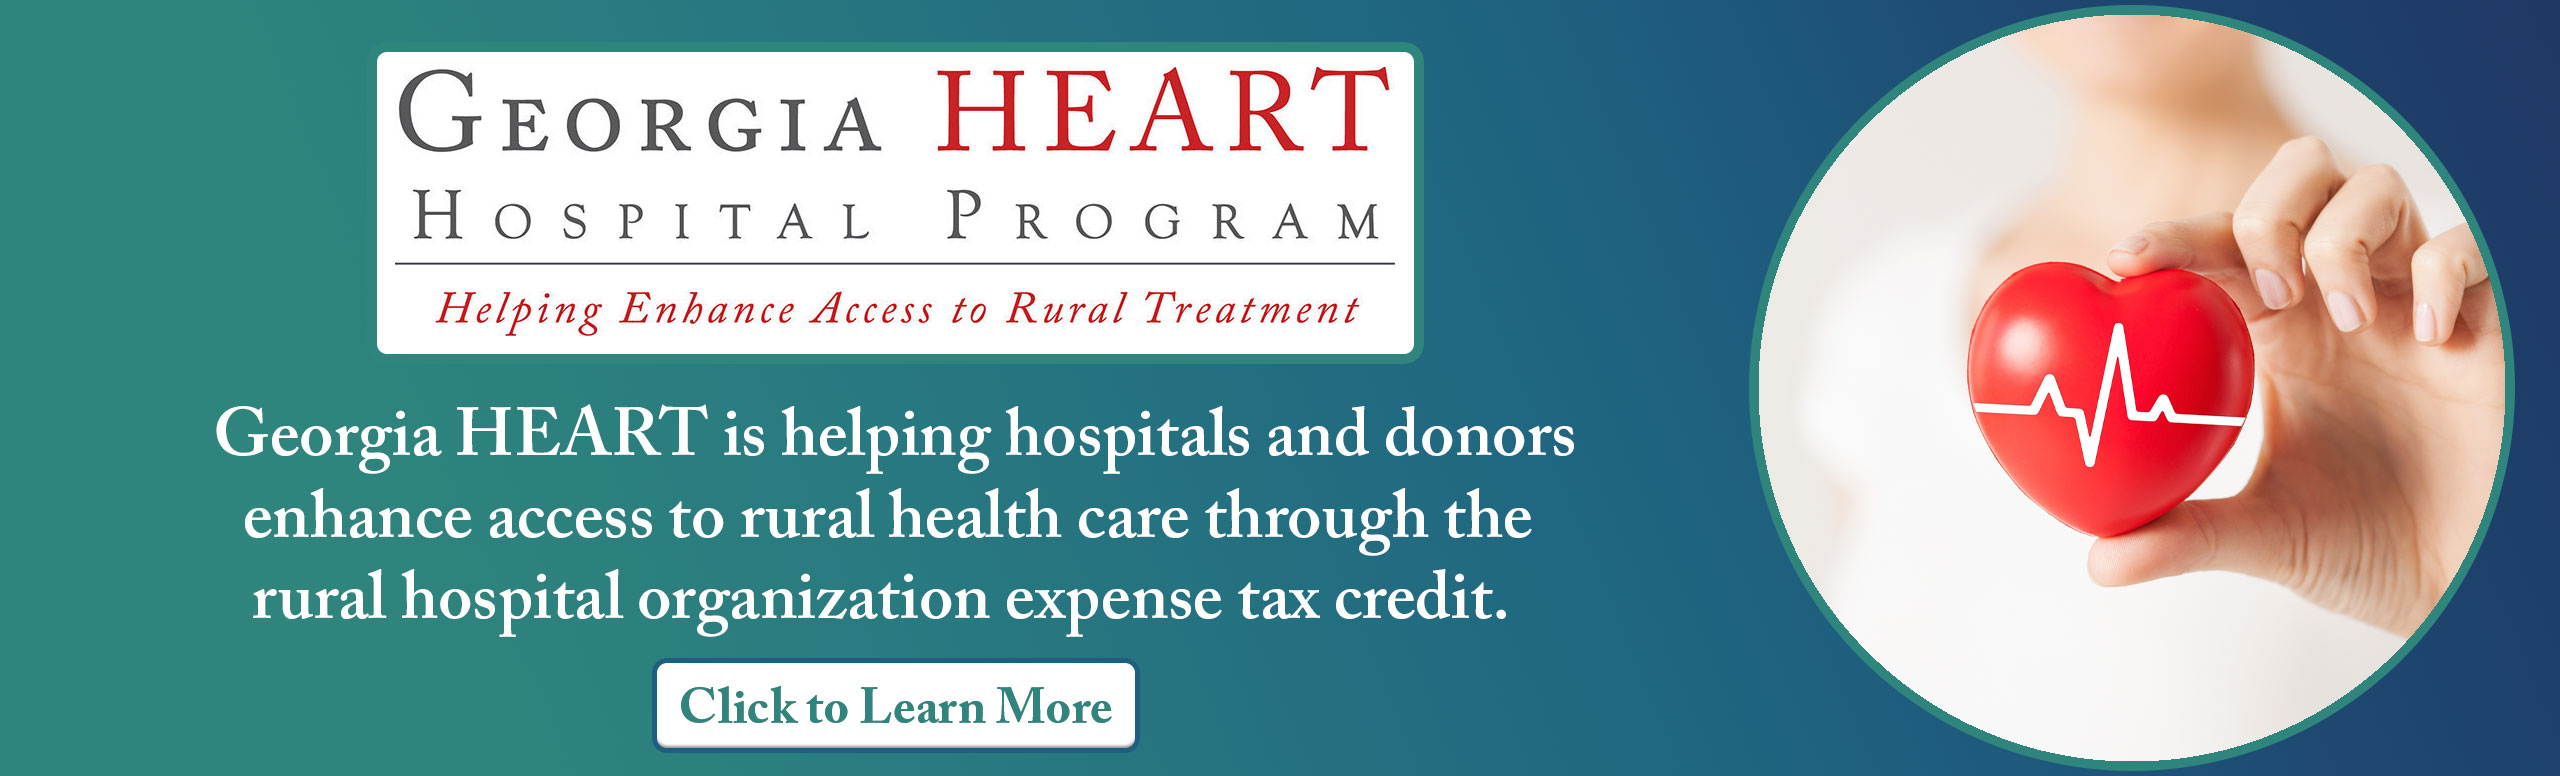 GEORGIA HEART 
HOSPITAL PROGRAM
Helping Enhance Access to Rural Treatment

Georgia HEART is helping hospitals and donors enhance access to rural health care through the rural hospital organization expense tax credit. 

(Click to Learn More)